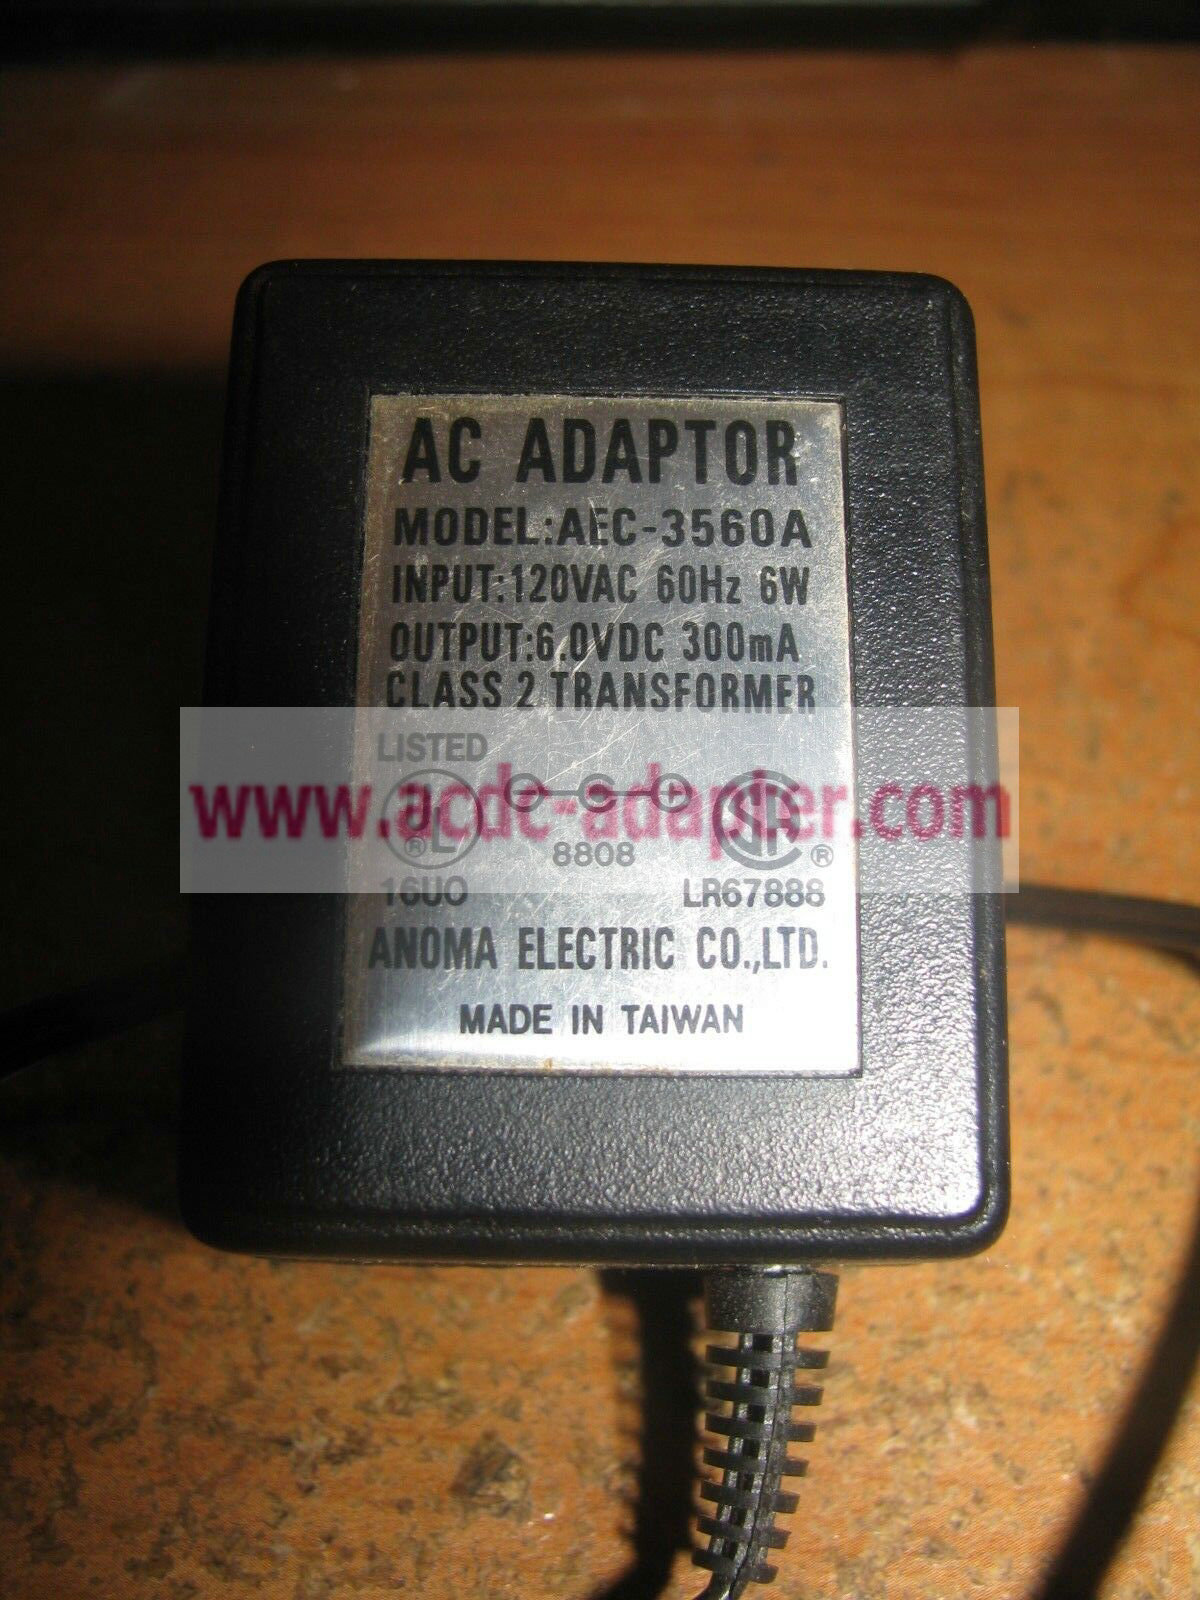 New Anoma Electric Co. AEC-3560A 6V DC 300mA 6W Adapter Transformer